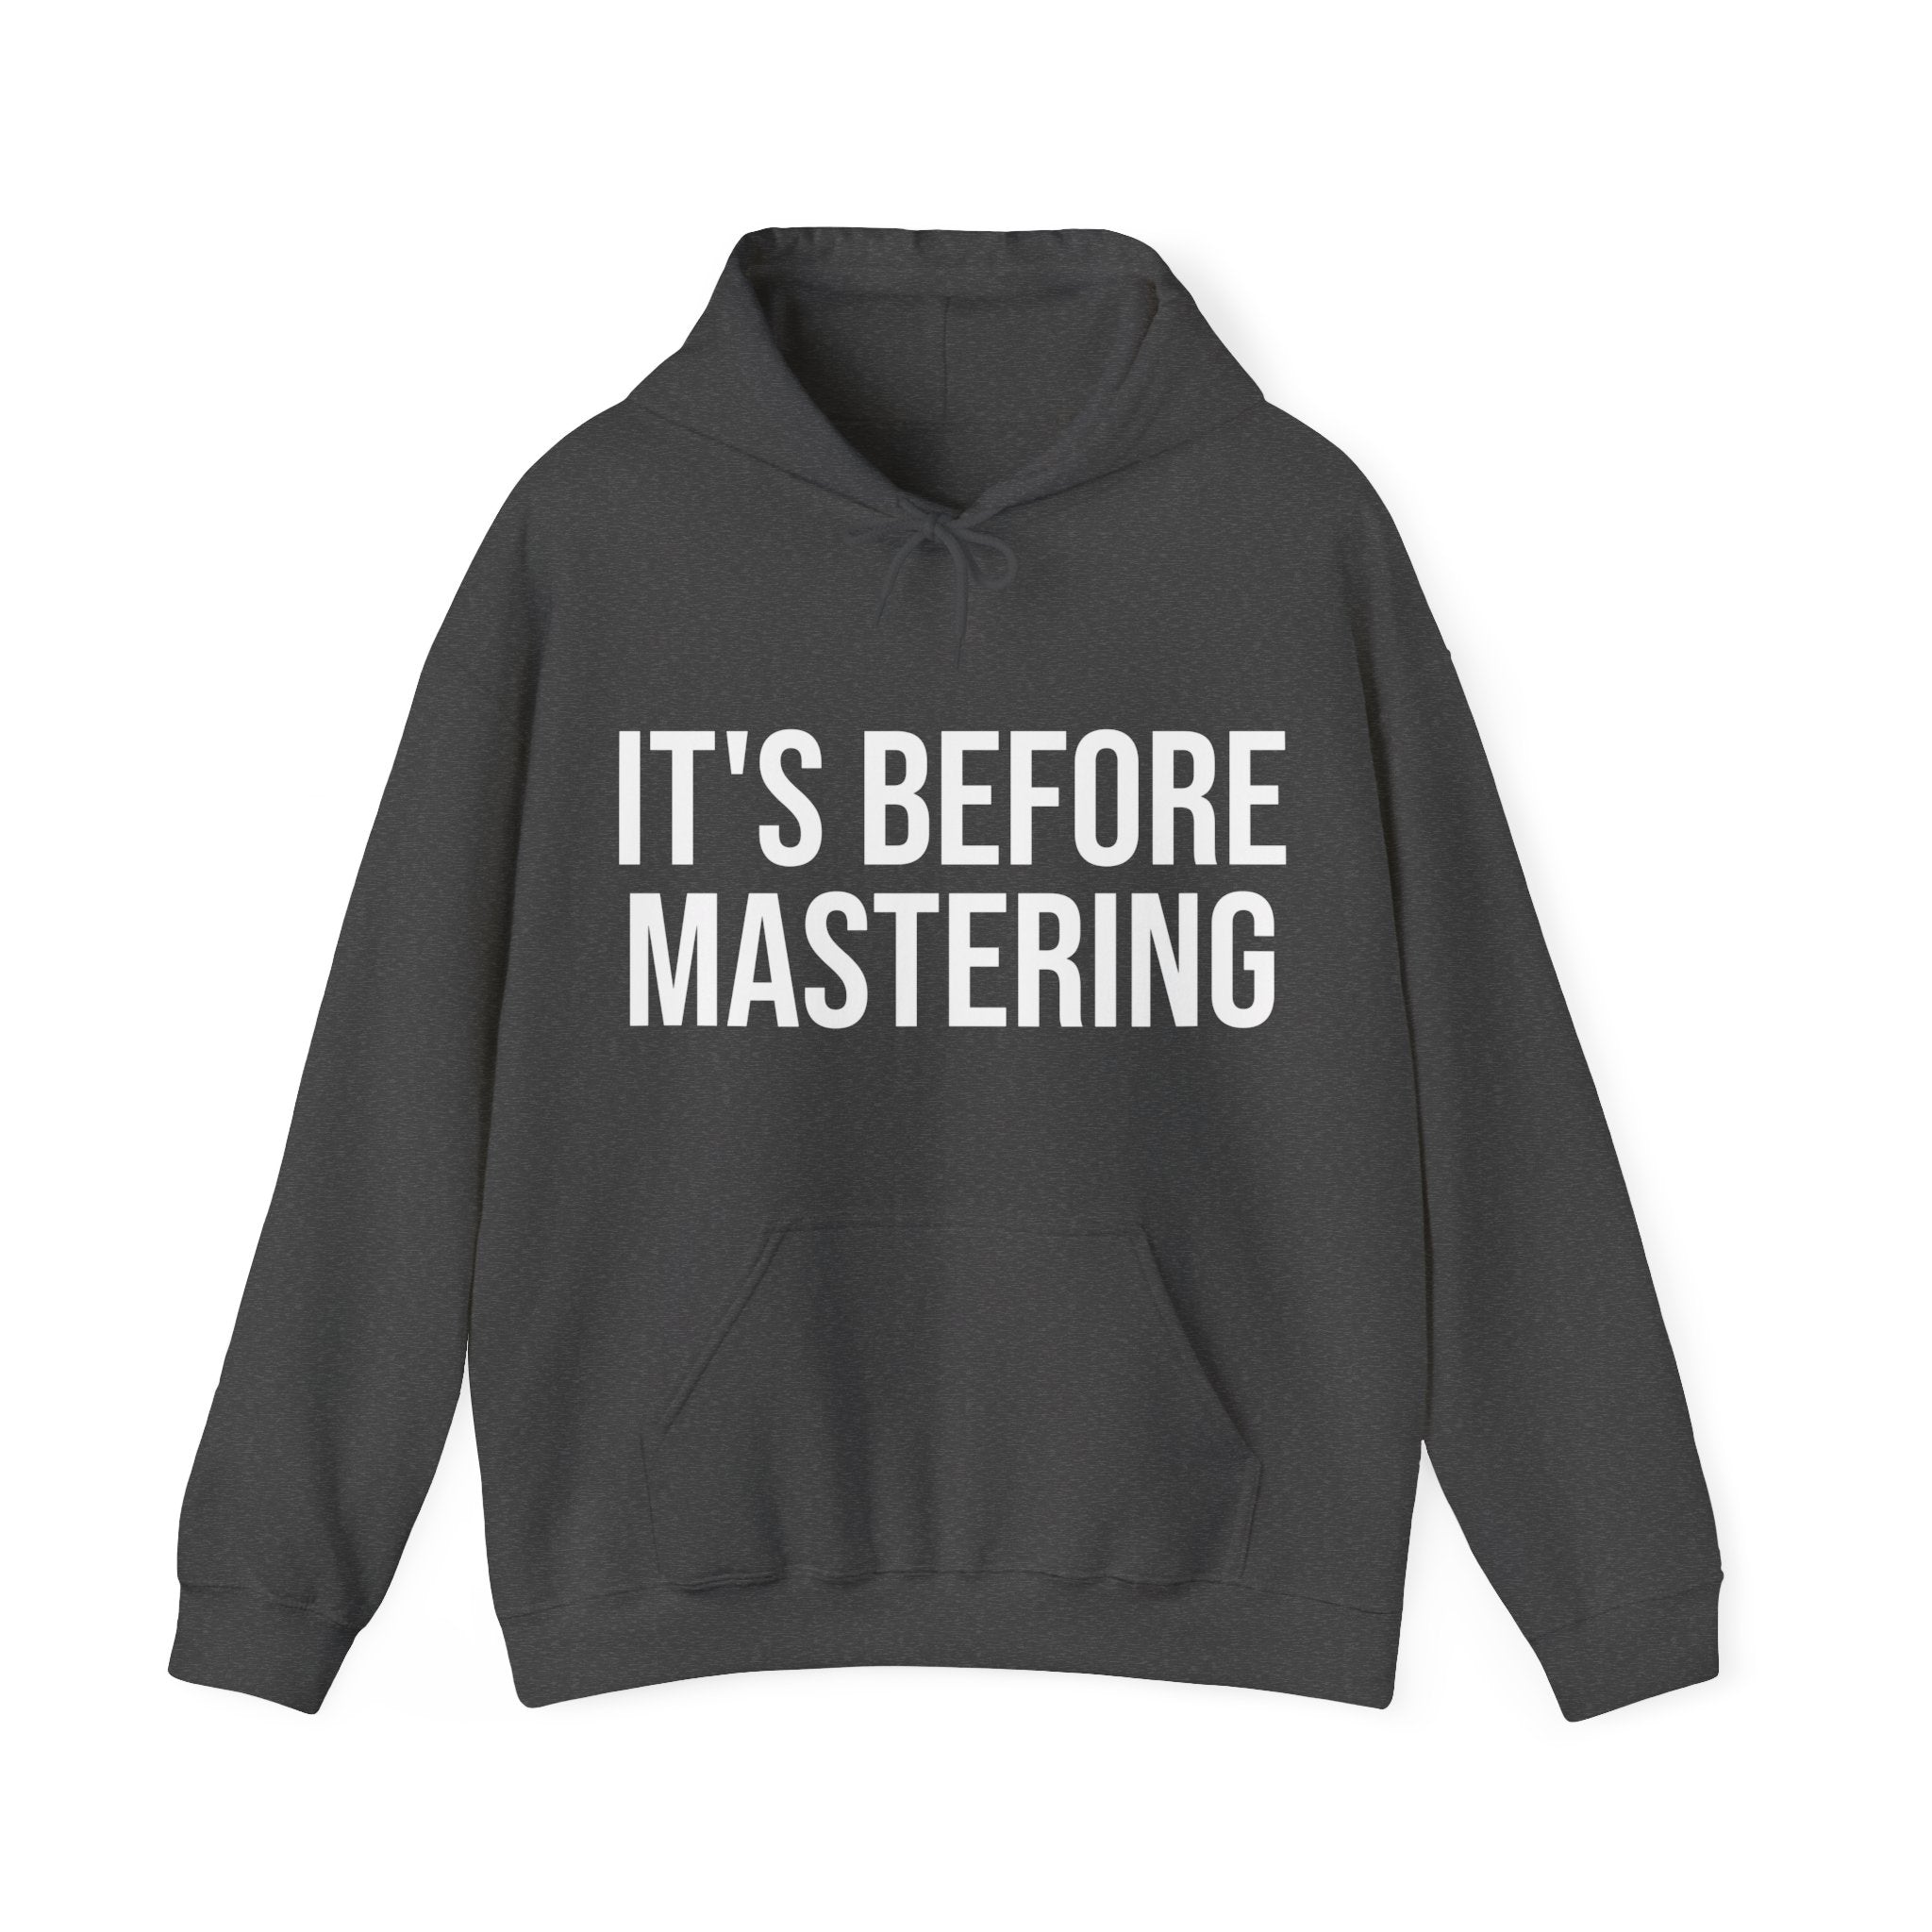 A heather brown hooded sweatshirt with a drawstring hood and a kangaroo pocket is laid out flat. Emblazoned across the chest in bold, block letters is the statement 'IT'S BEFORE MASTERING,' implying a stage in the audio production process before a track is fully produced. The typography and message resonate with music producers and audio engineers who appreciate the steps of music creation